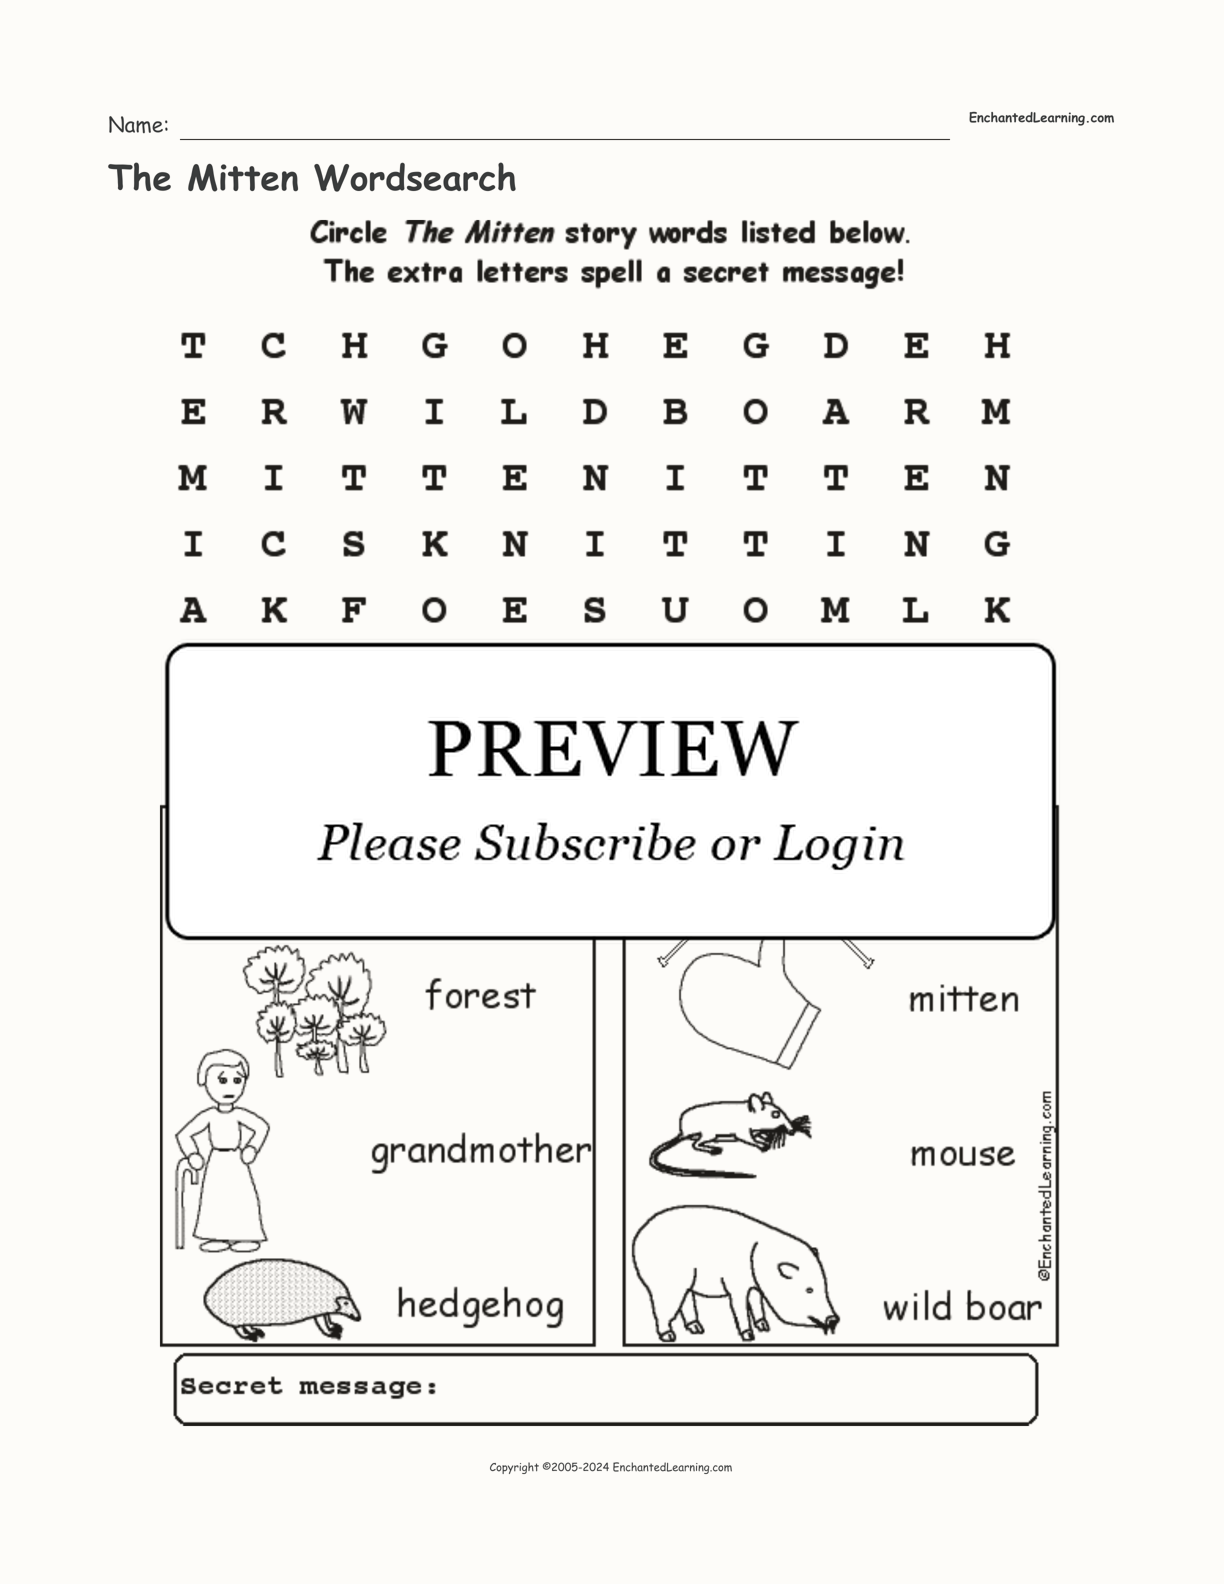 The Mitten Wordsearch interactive worksheet page 1